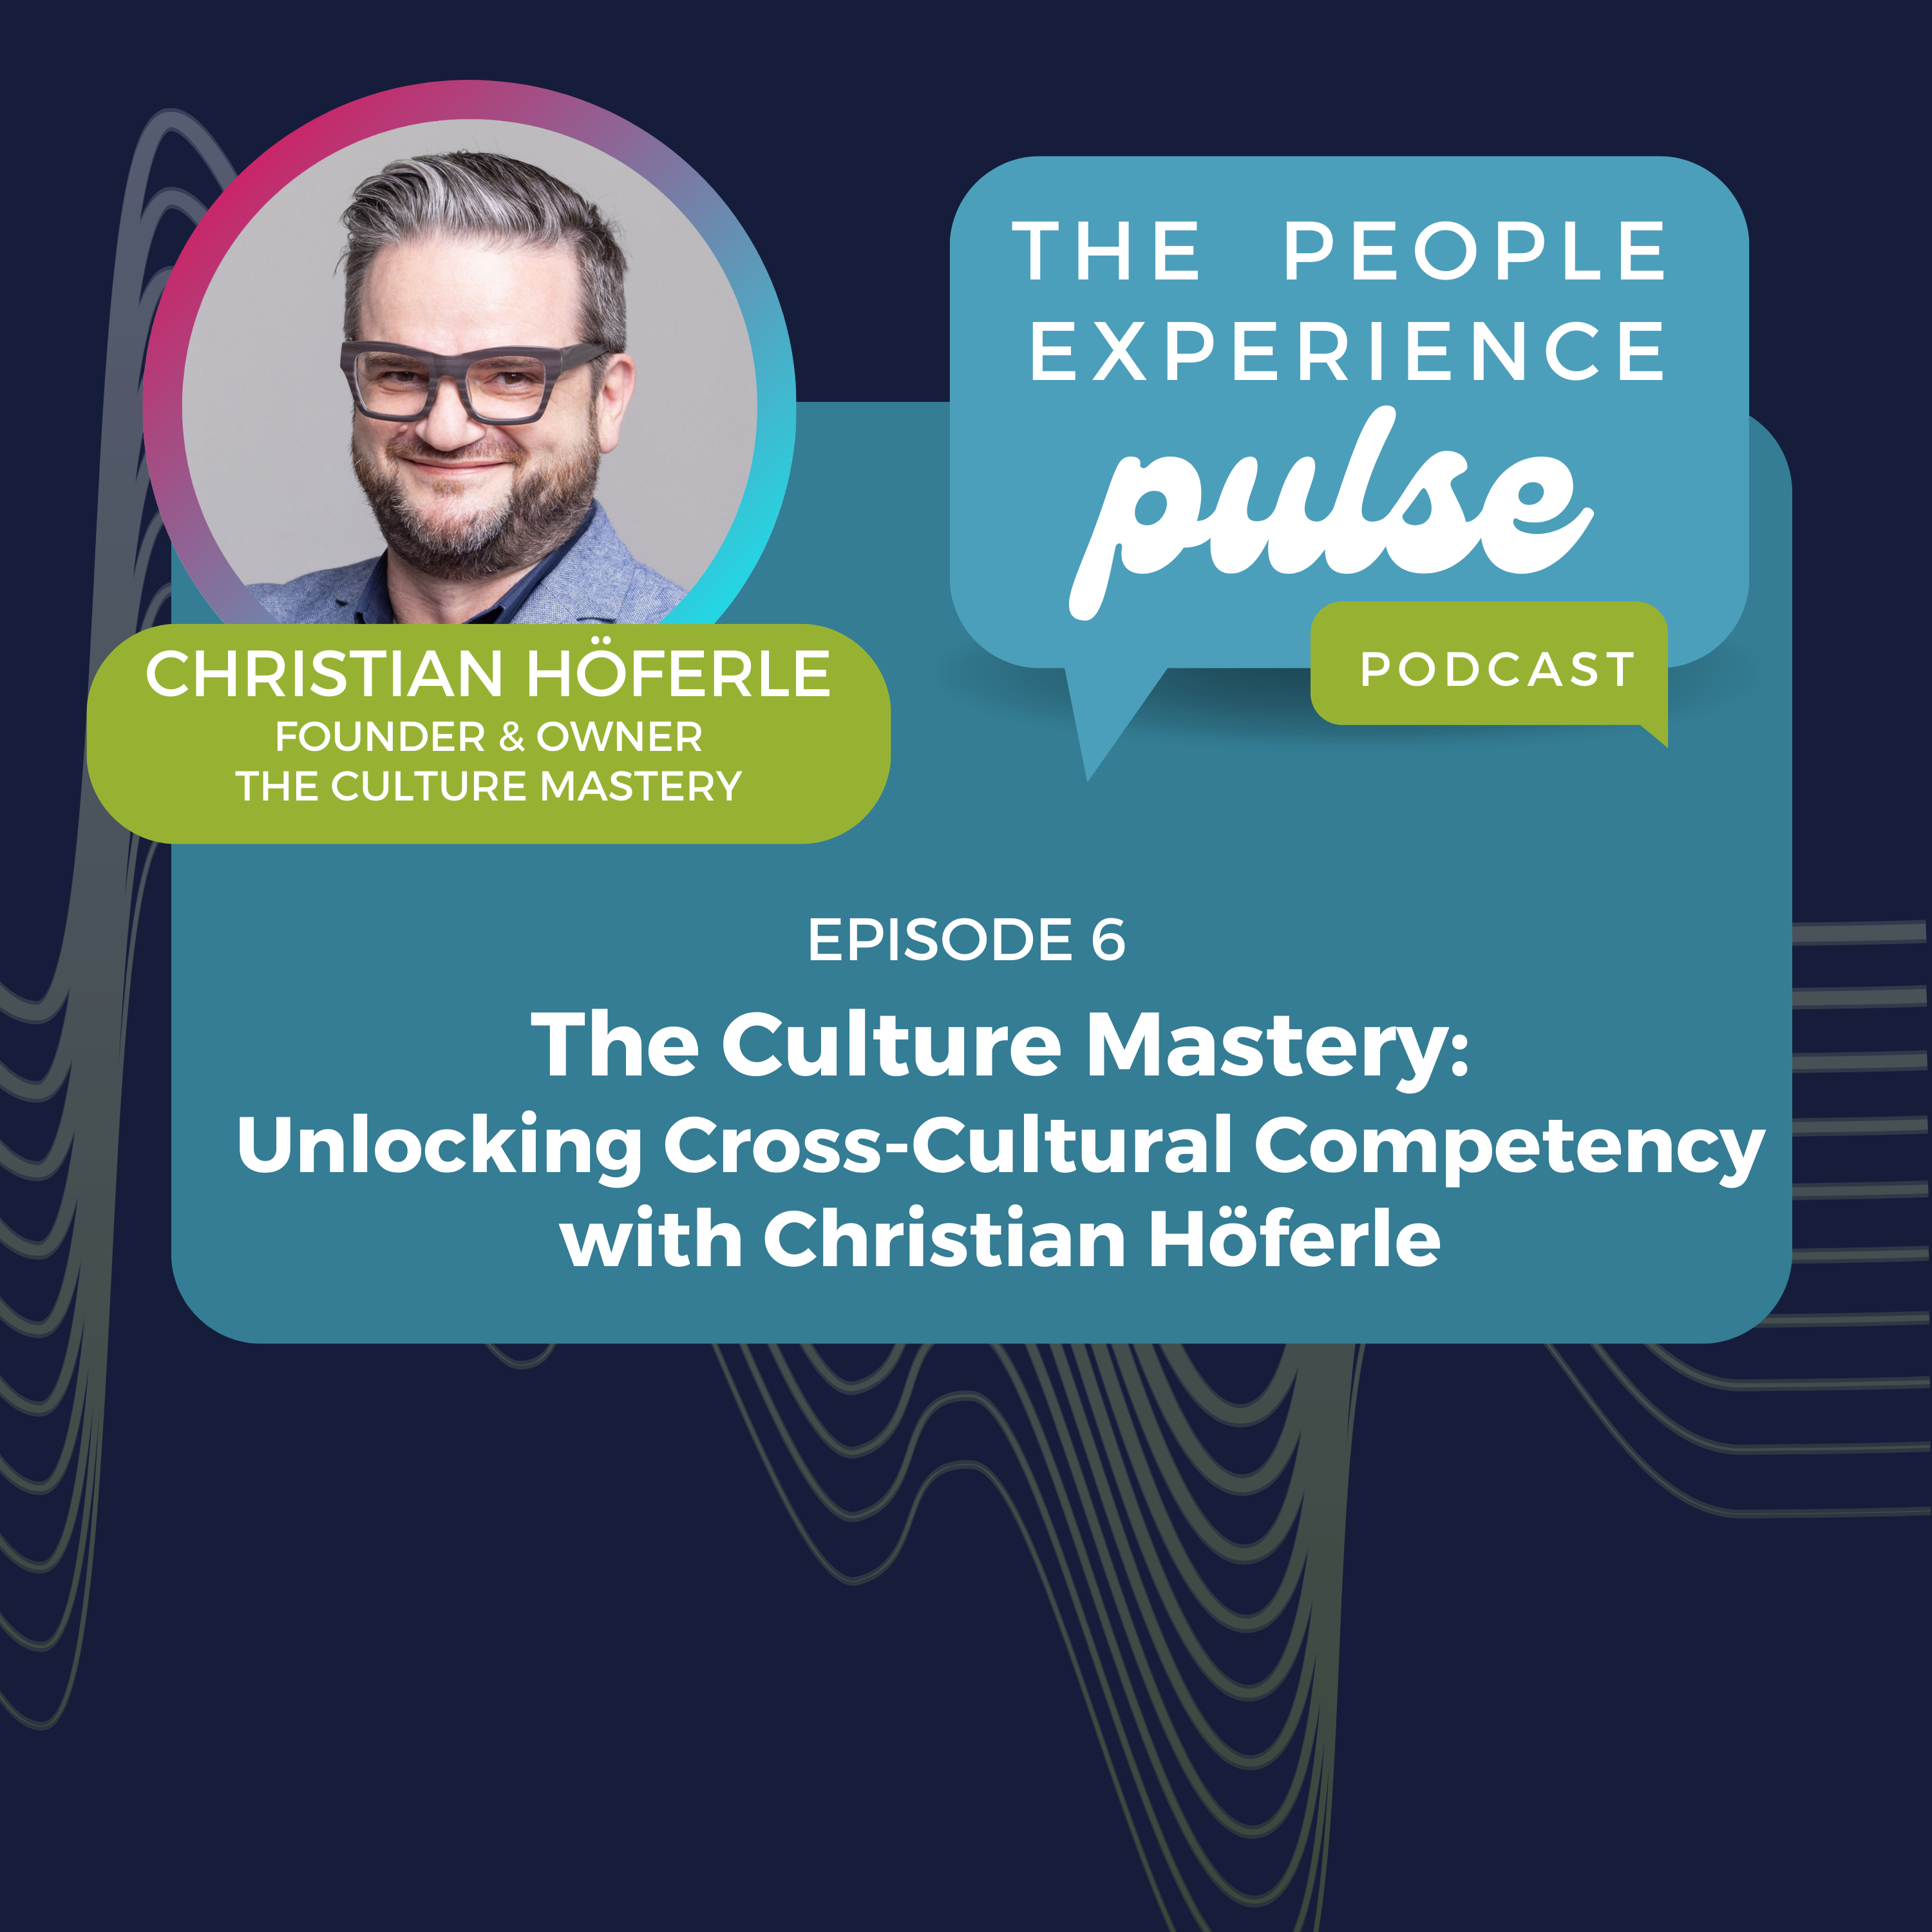 Episode 6: The Culture Mastery: Unlocking Cross-Cultural Competency with Christian Höferle